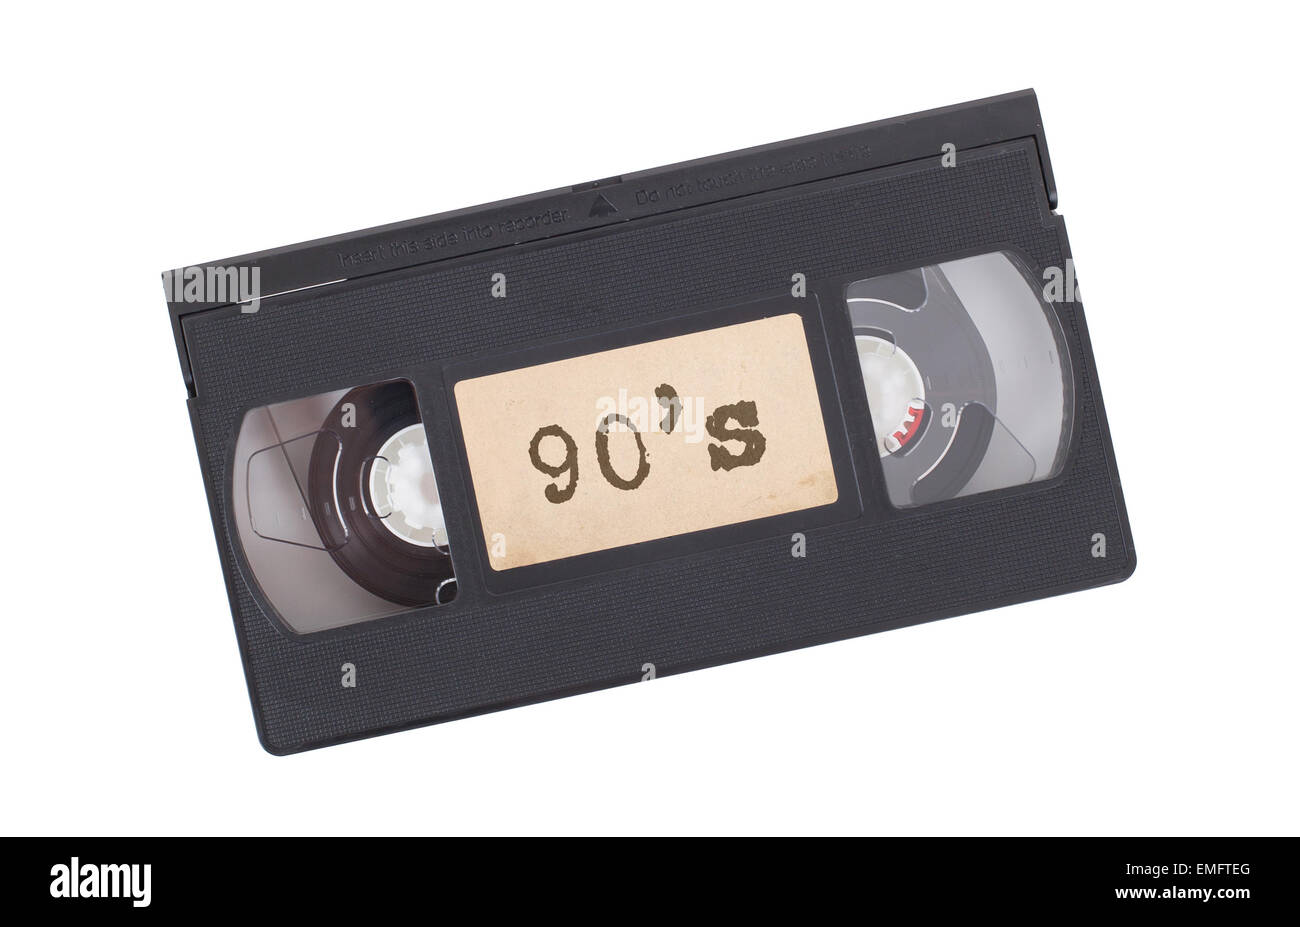 Retro videotape isolated on a white background - 90s Stock Photo